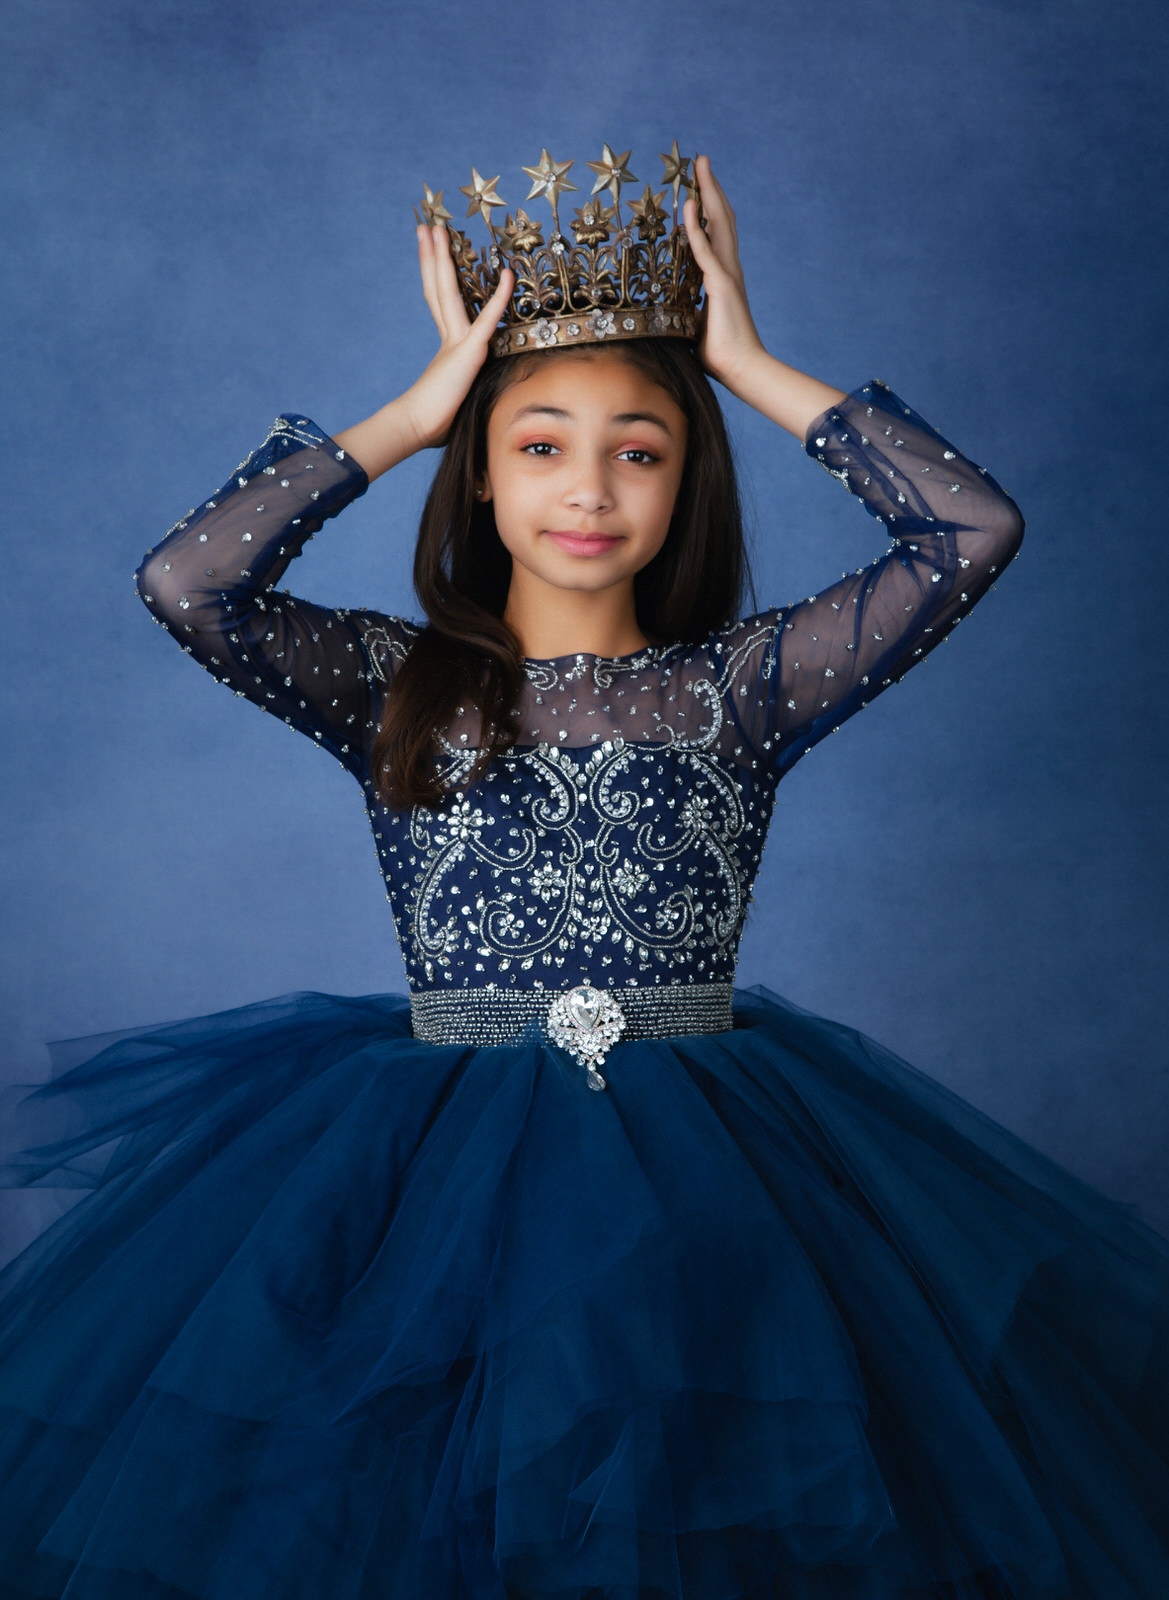 A young girl in an ornate blue dress holds a crown above her head in a studio dallas babysitters